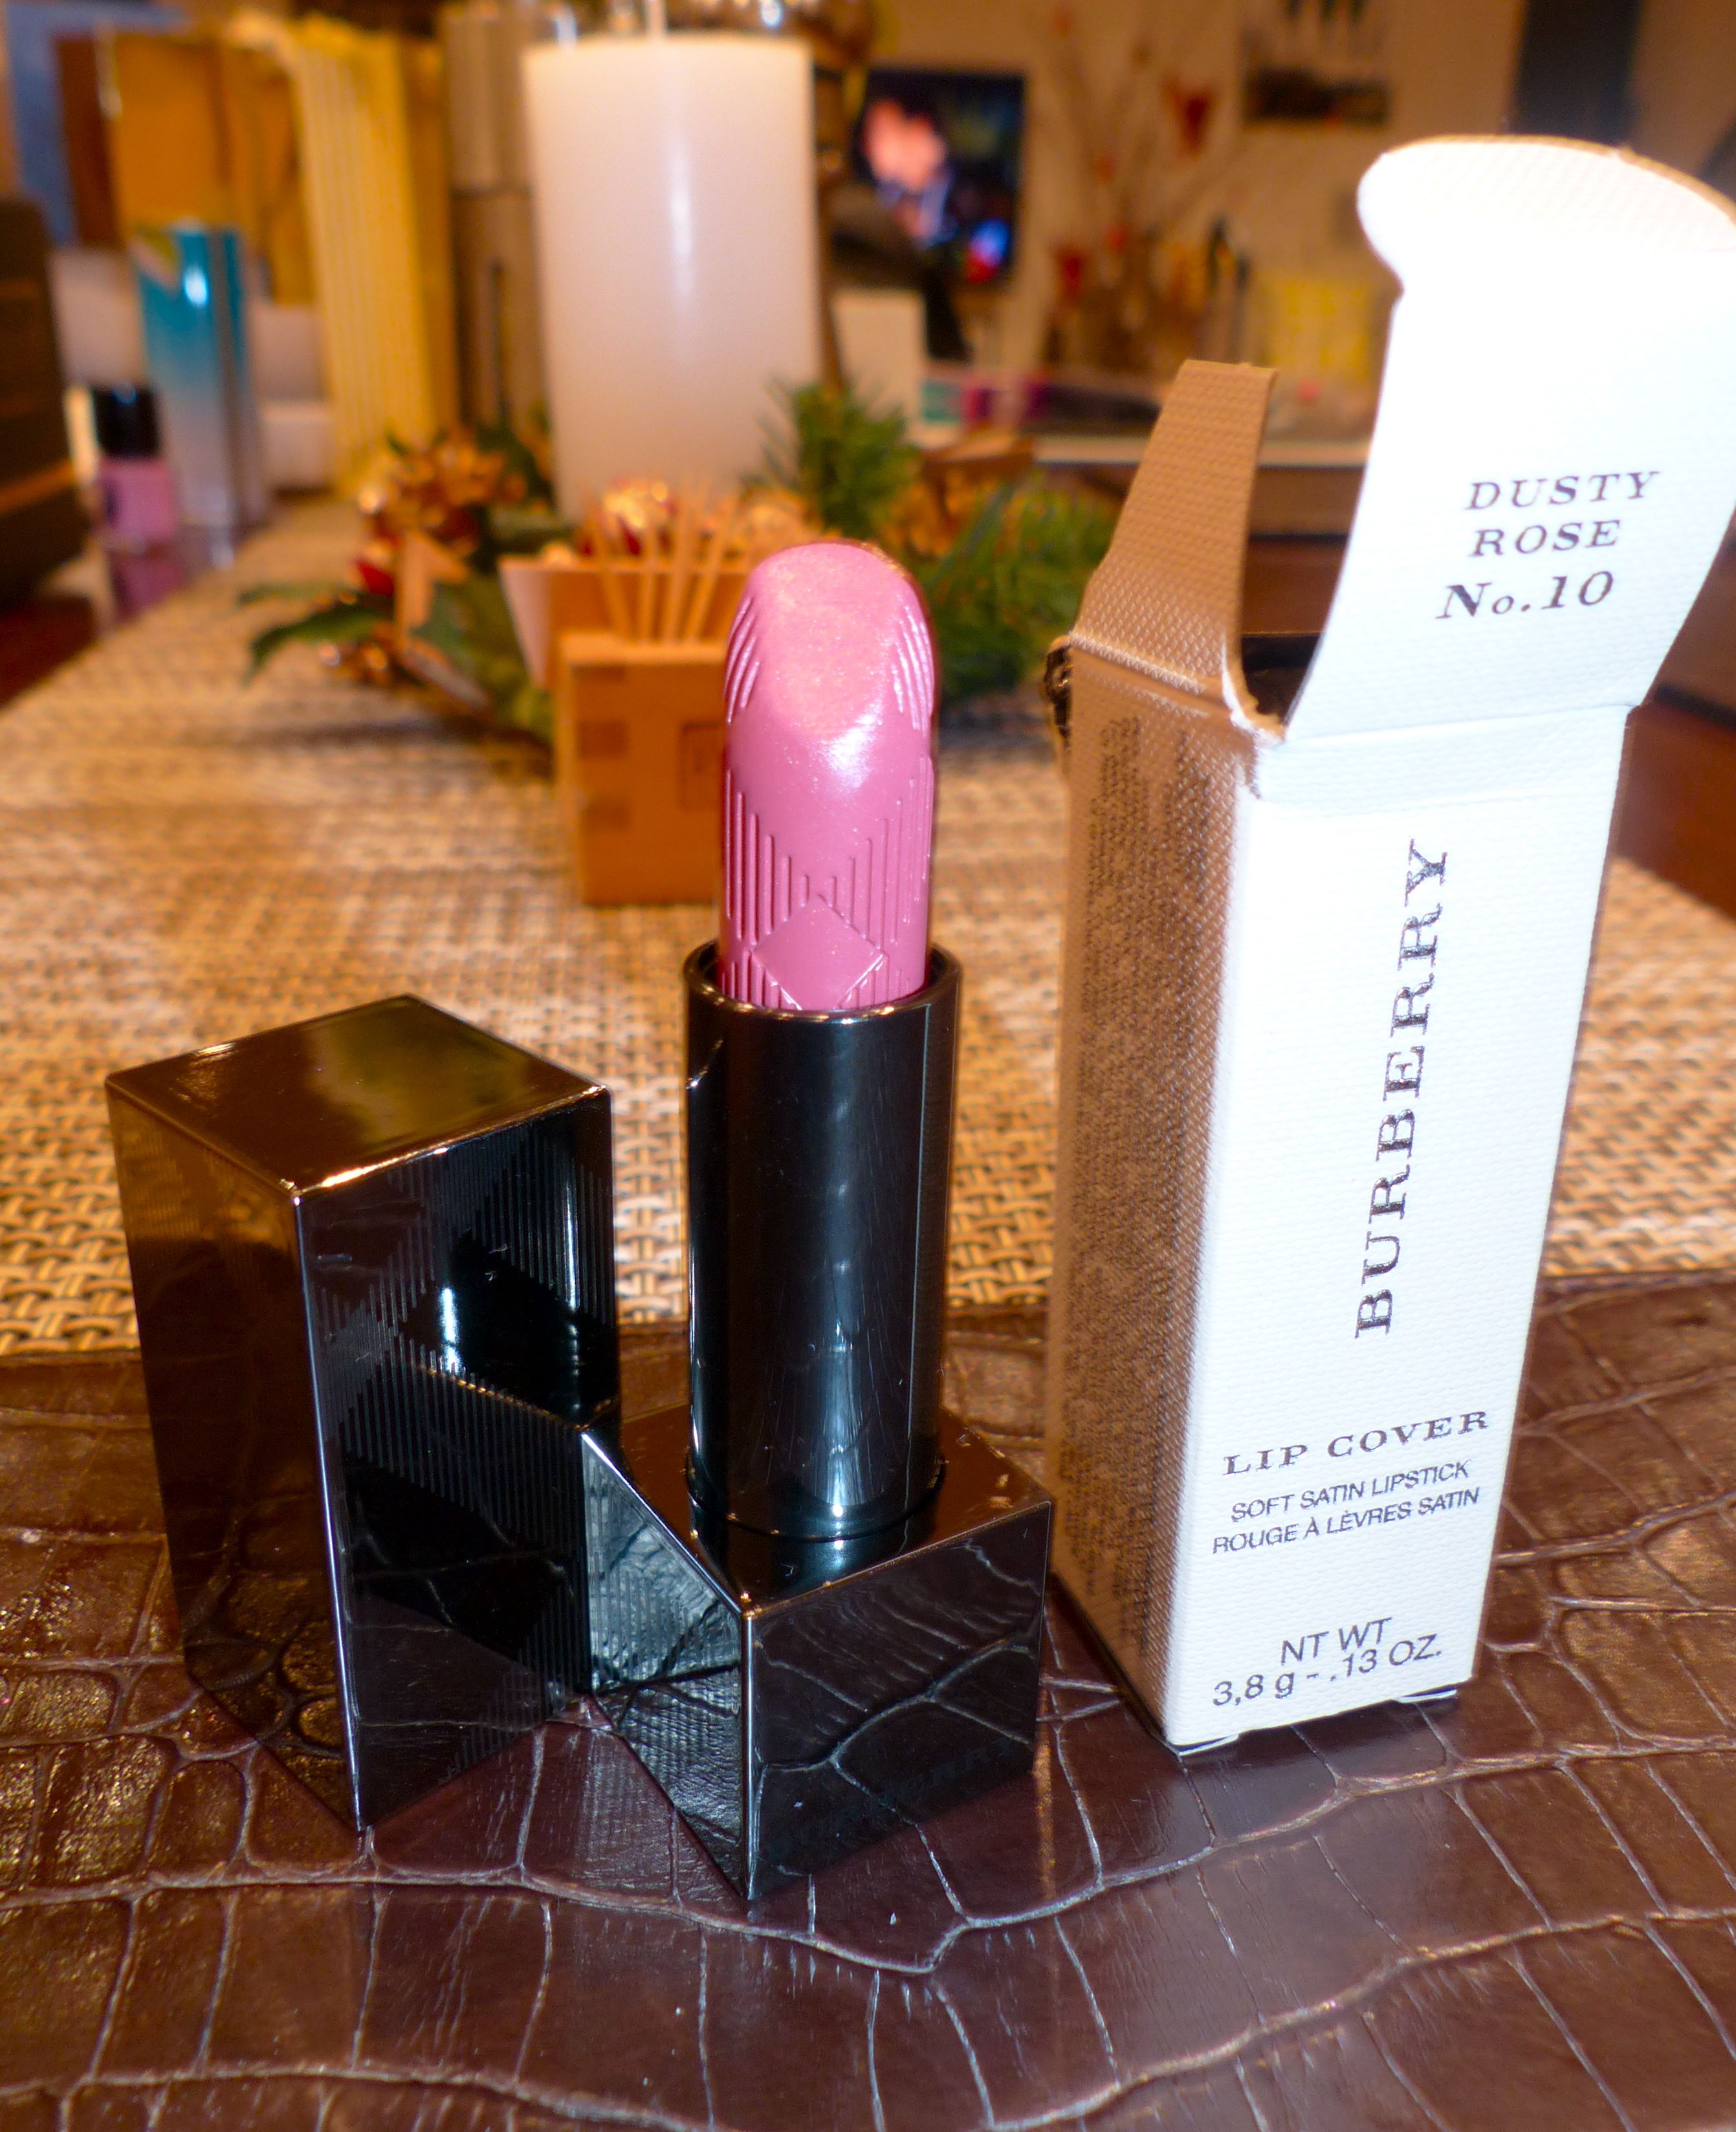 A new Burberry lipstick - LOVE the stylish platinum packaging.